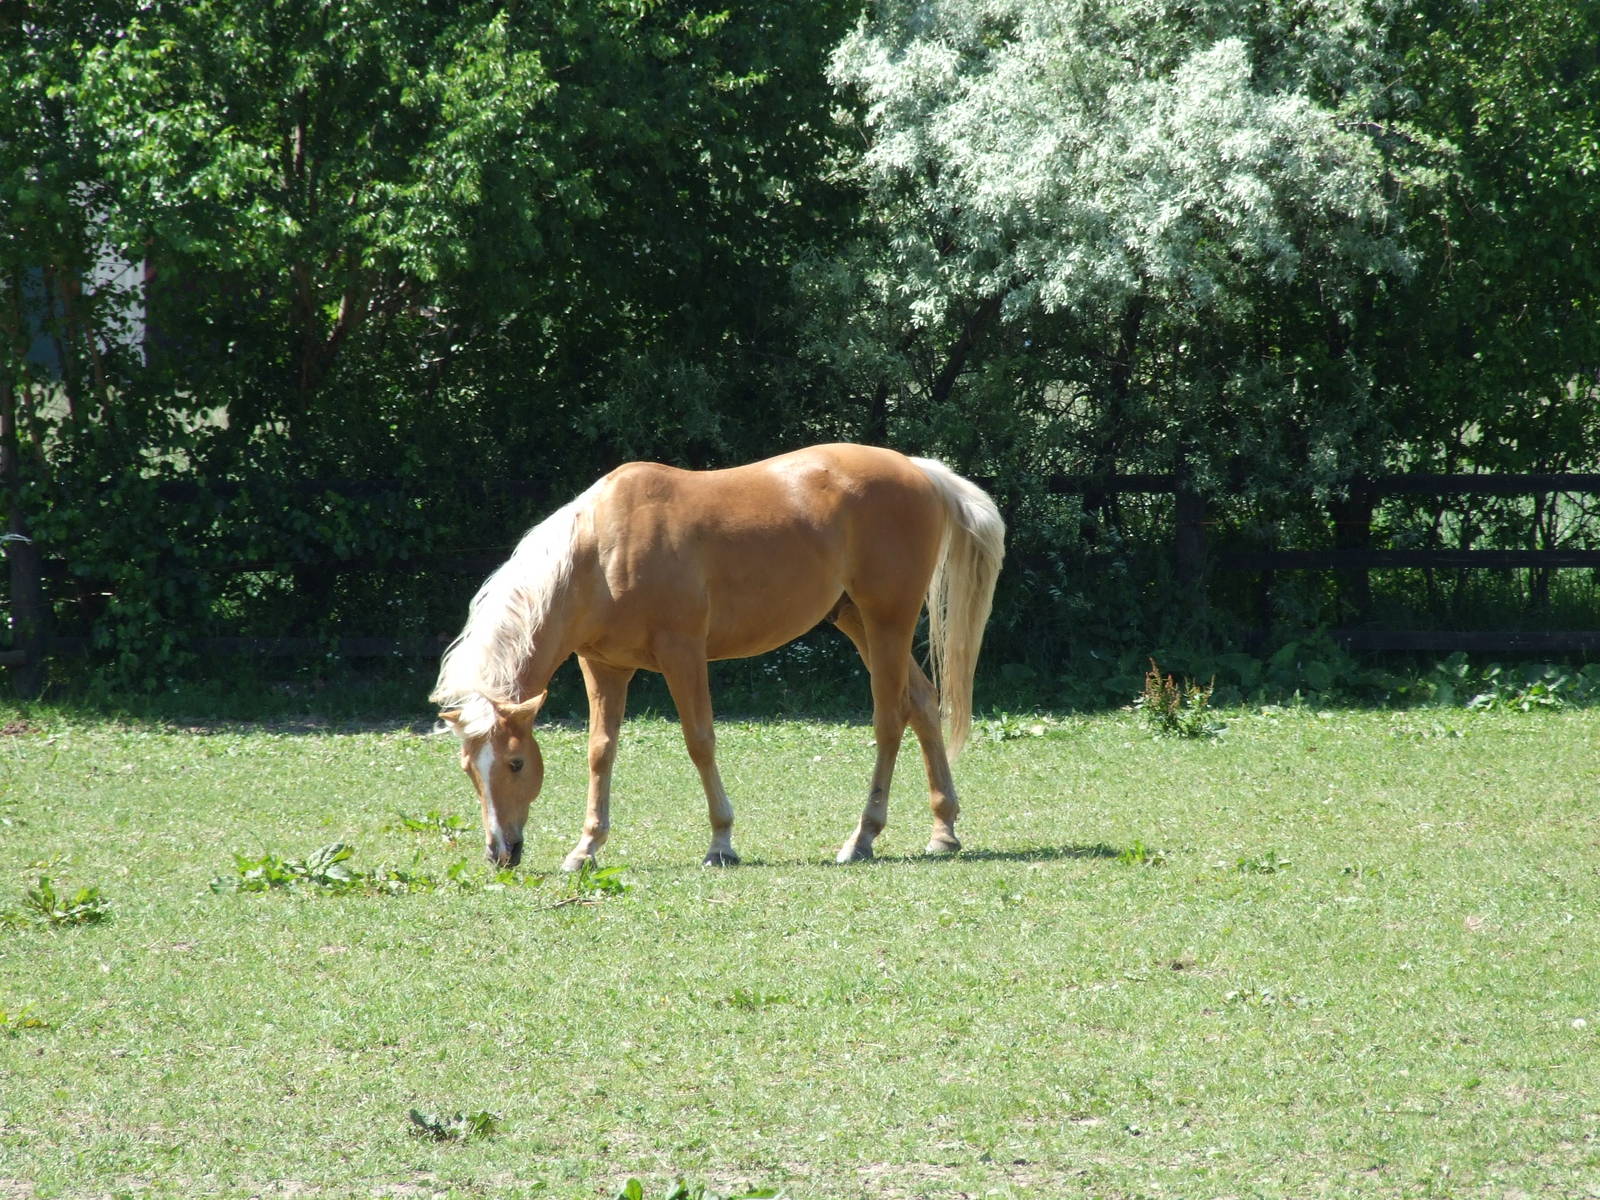 a horse eats grass in an enclosed grassy area